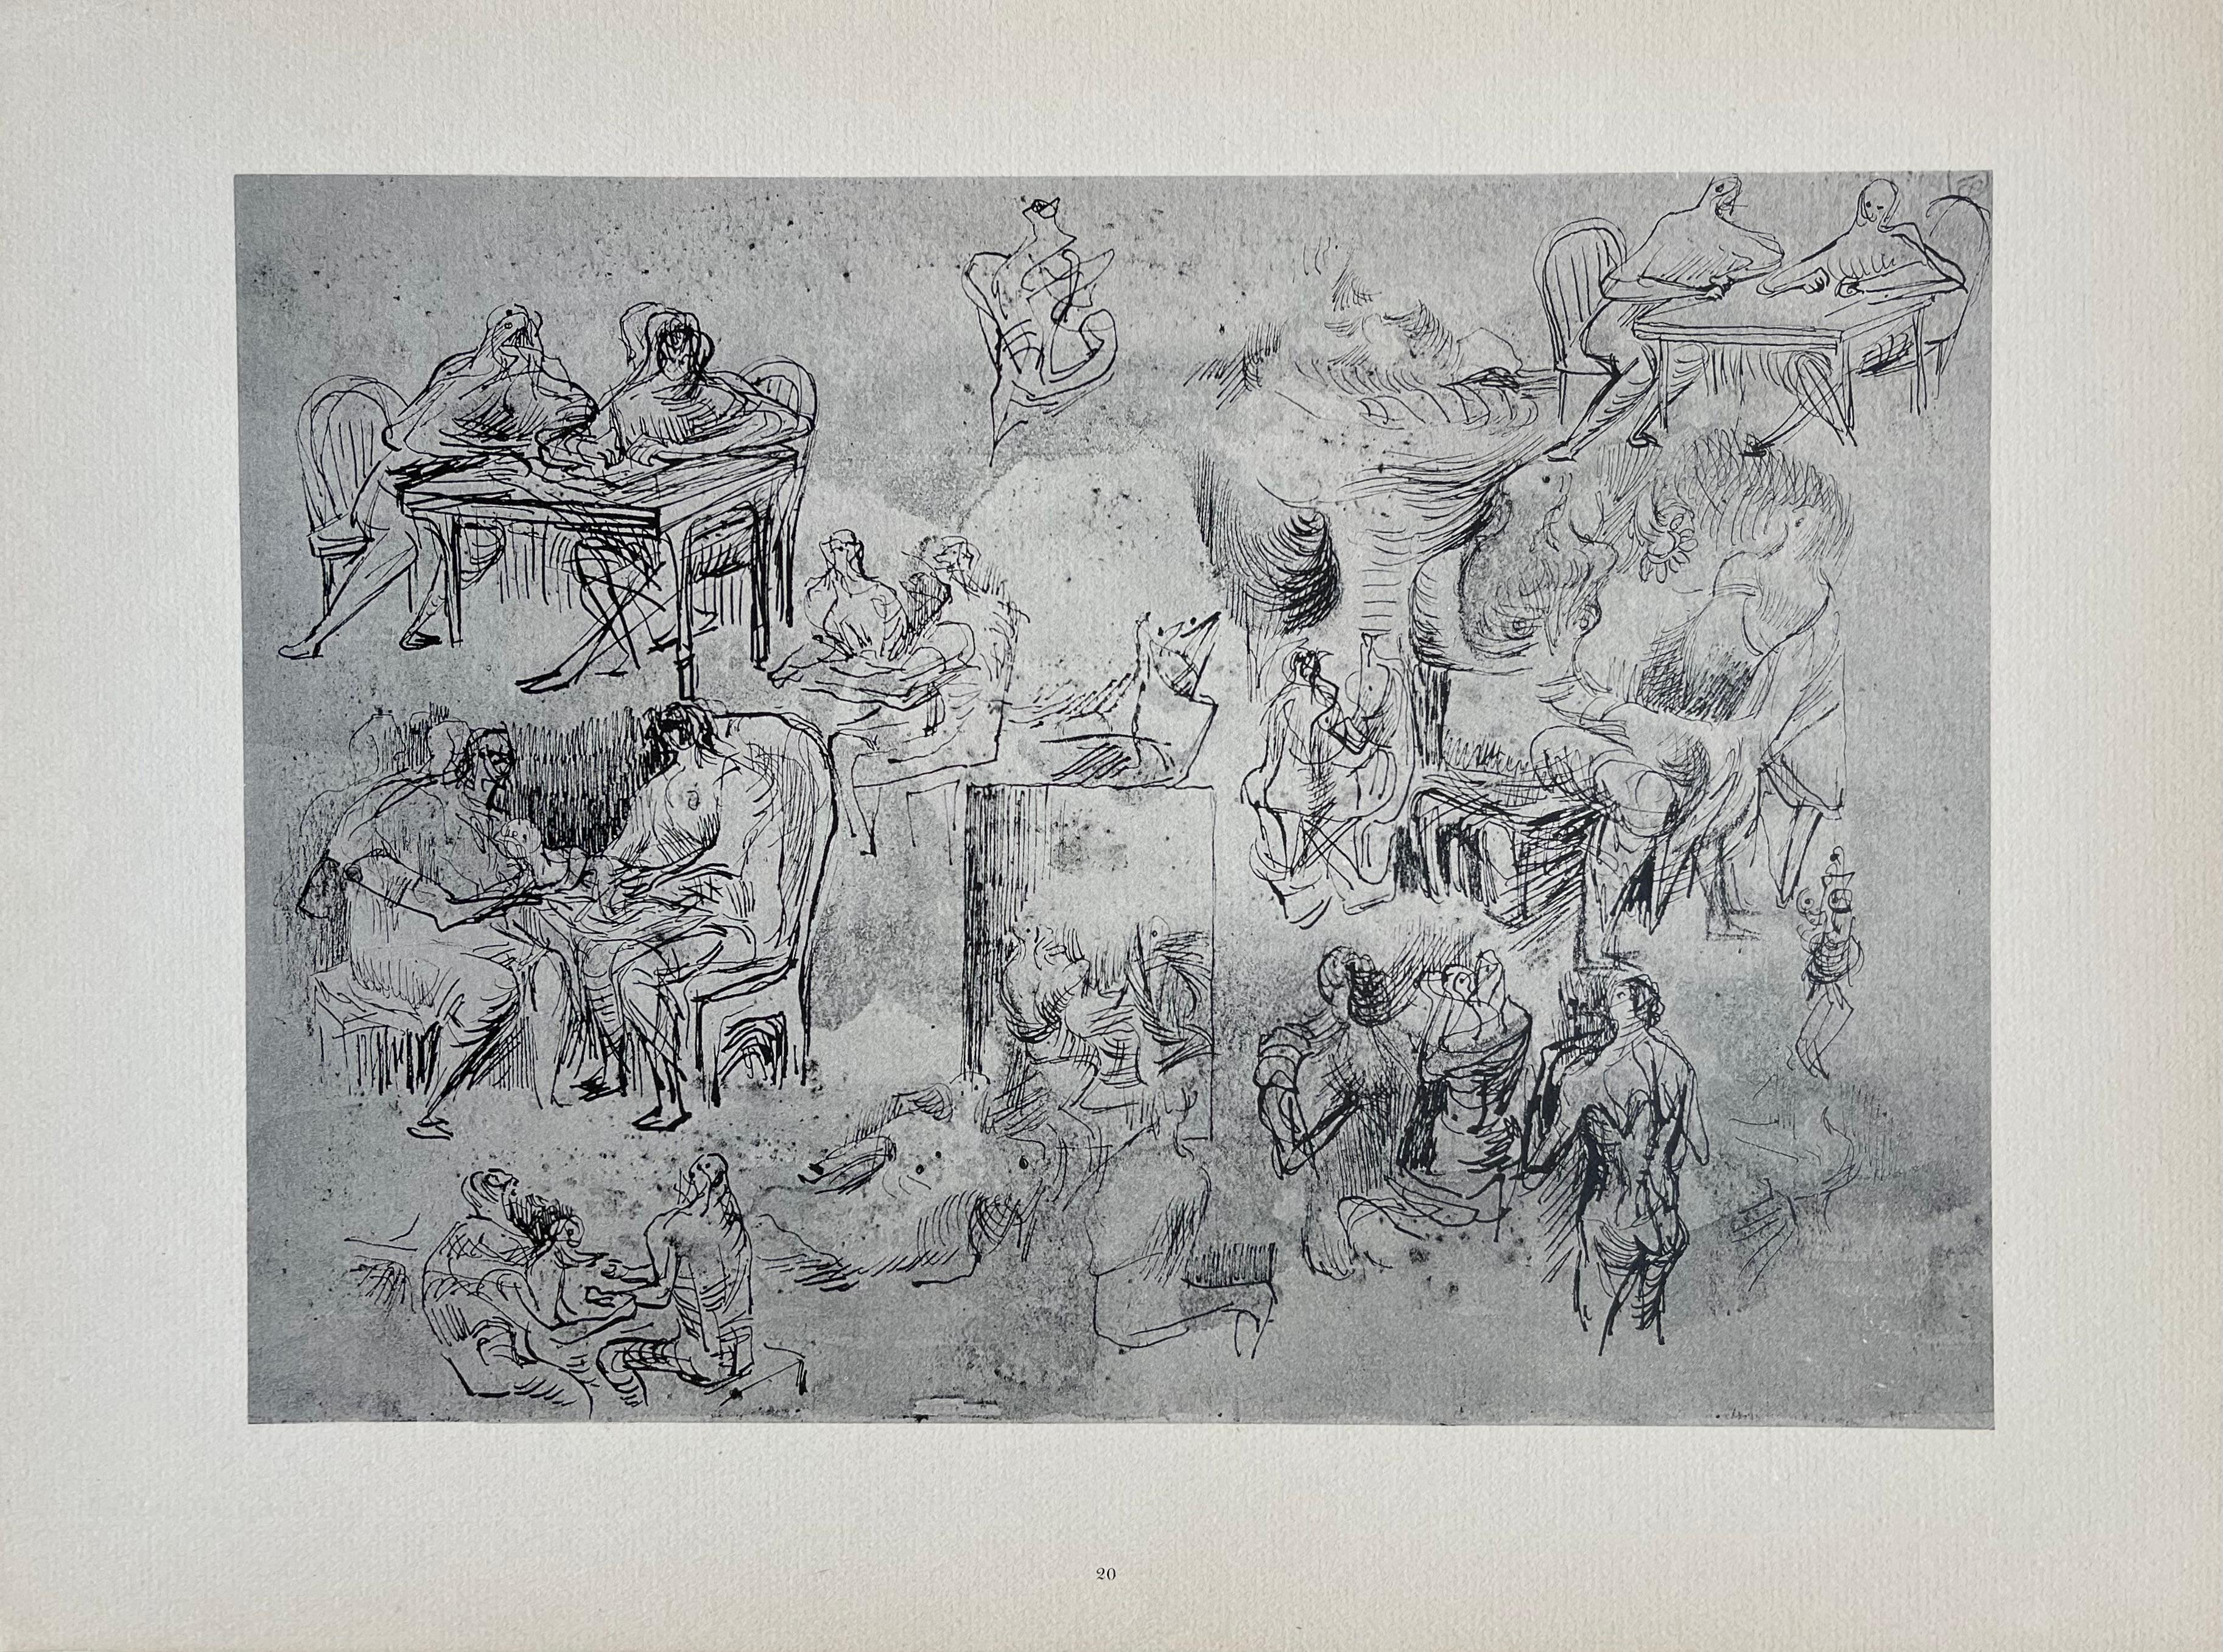 Moore, Page from Sketchbook, The Drawings of Henry Moore (after) For Sale 8